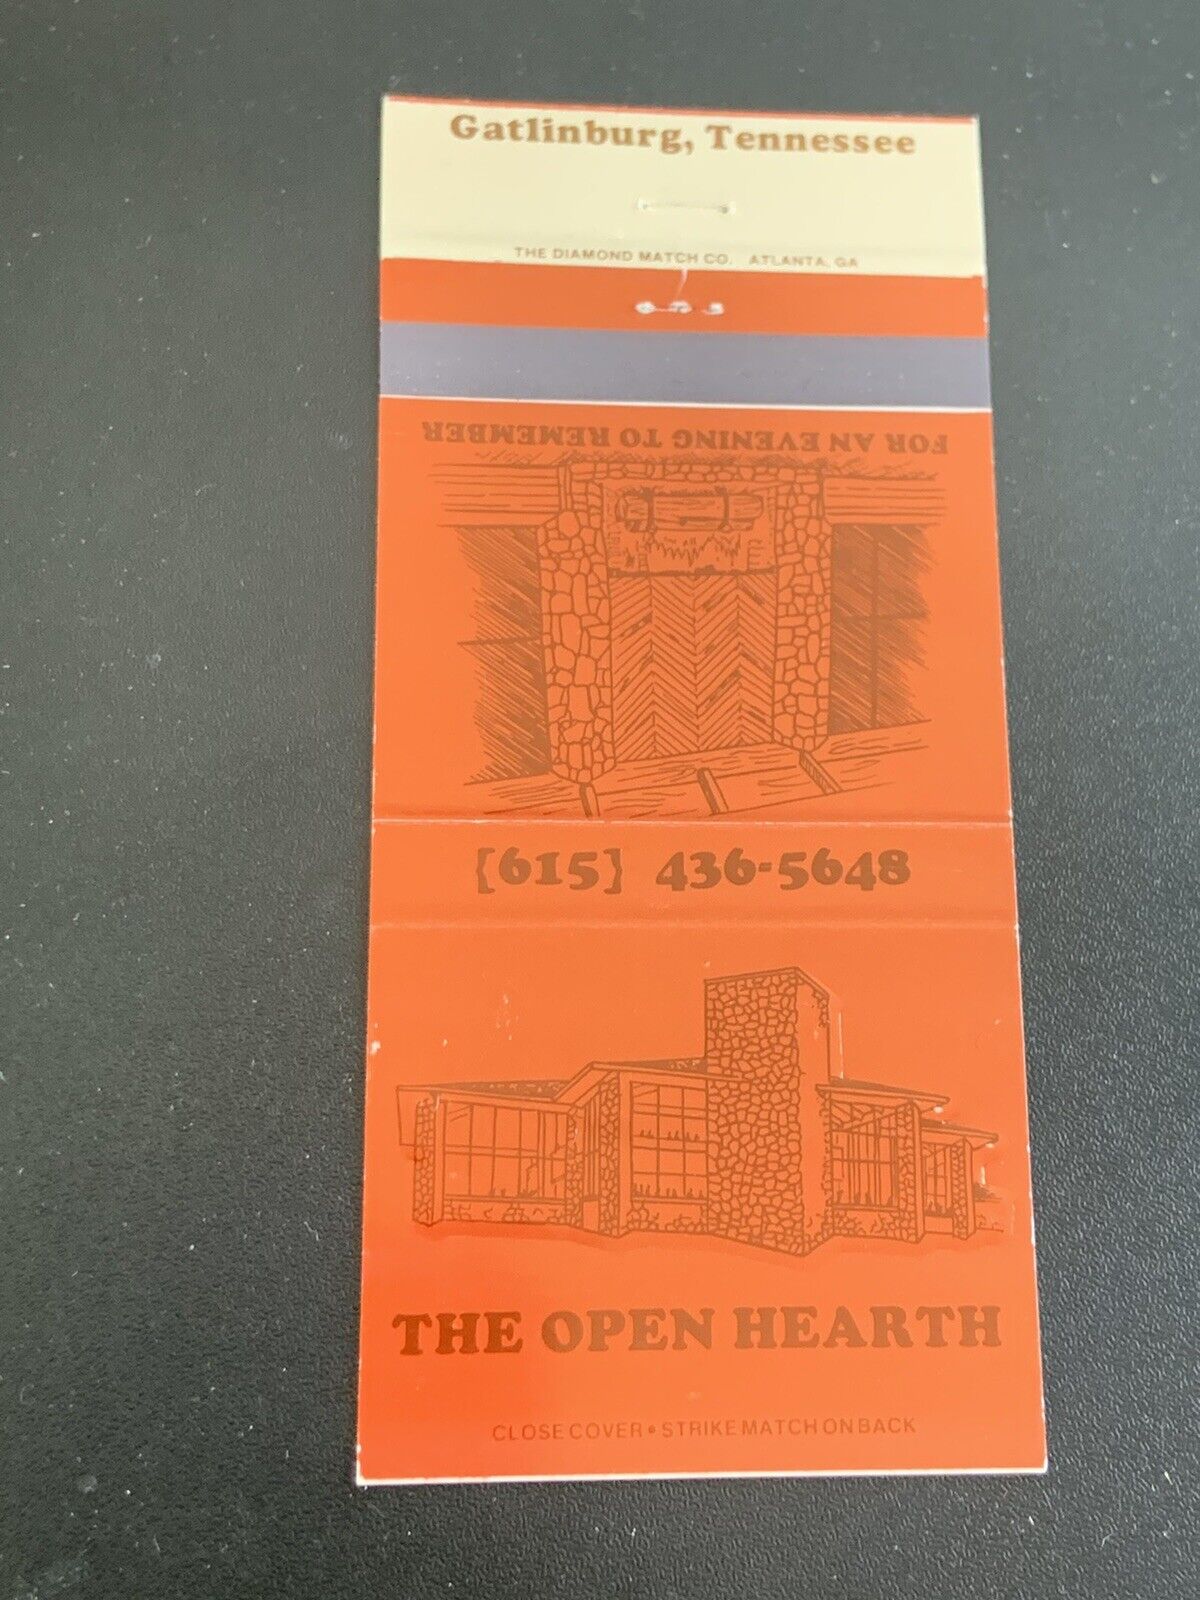 Matchbook Cover - The Open Hearth Gatlinburg Tennessee